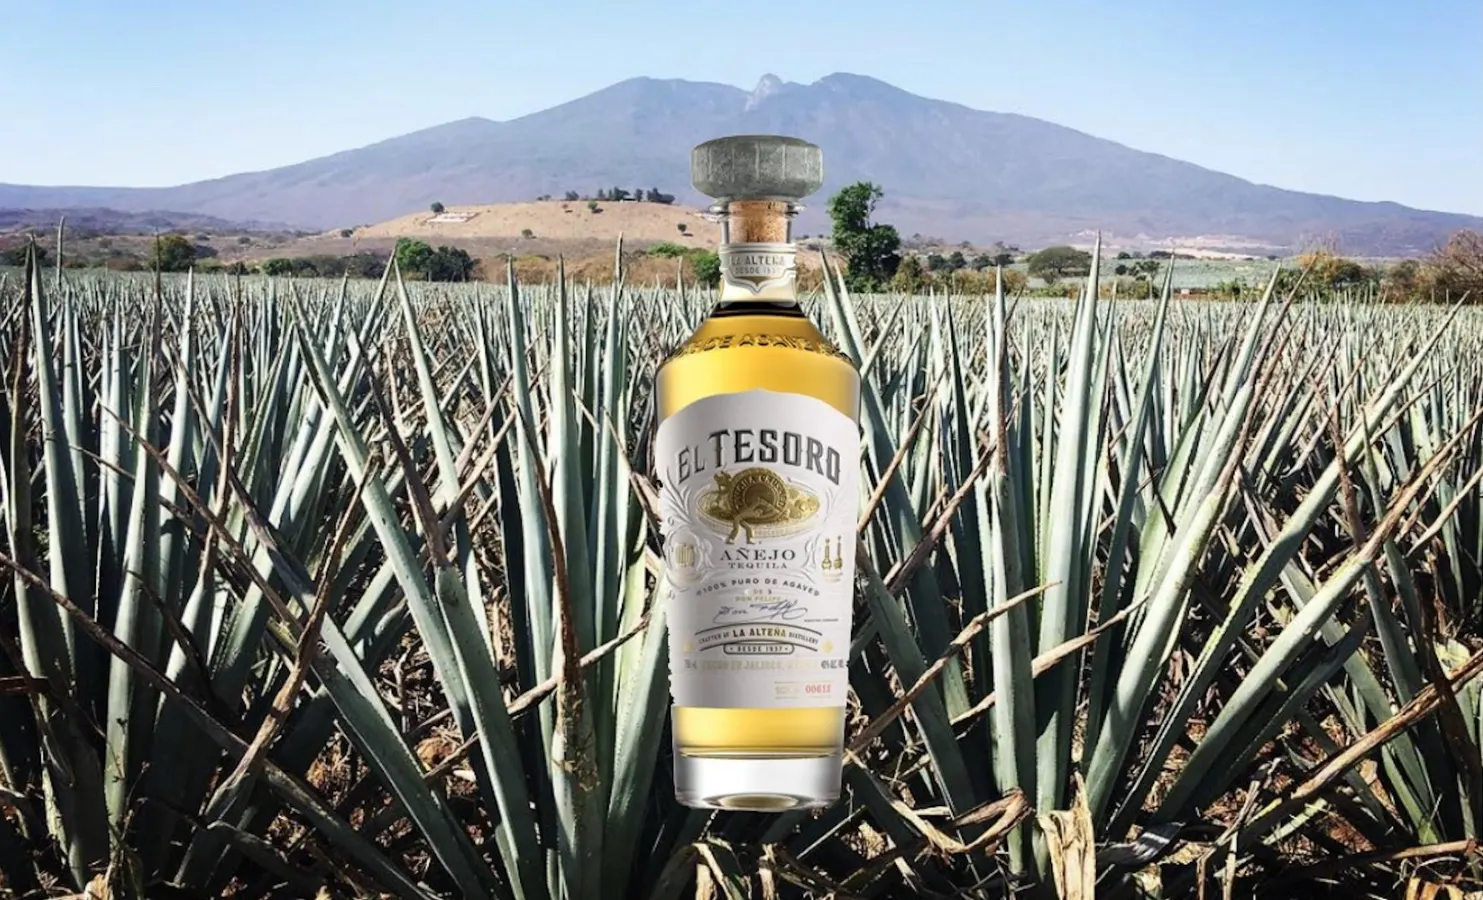 El Tesoro Paradiso Review: The Fusion of Tequila Excellence